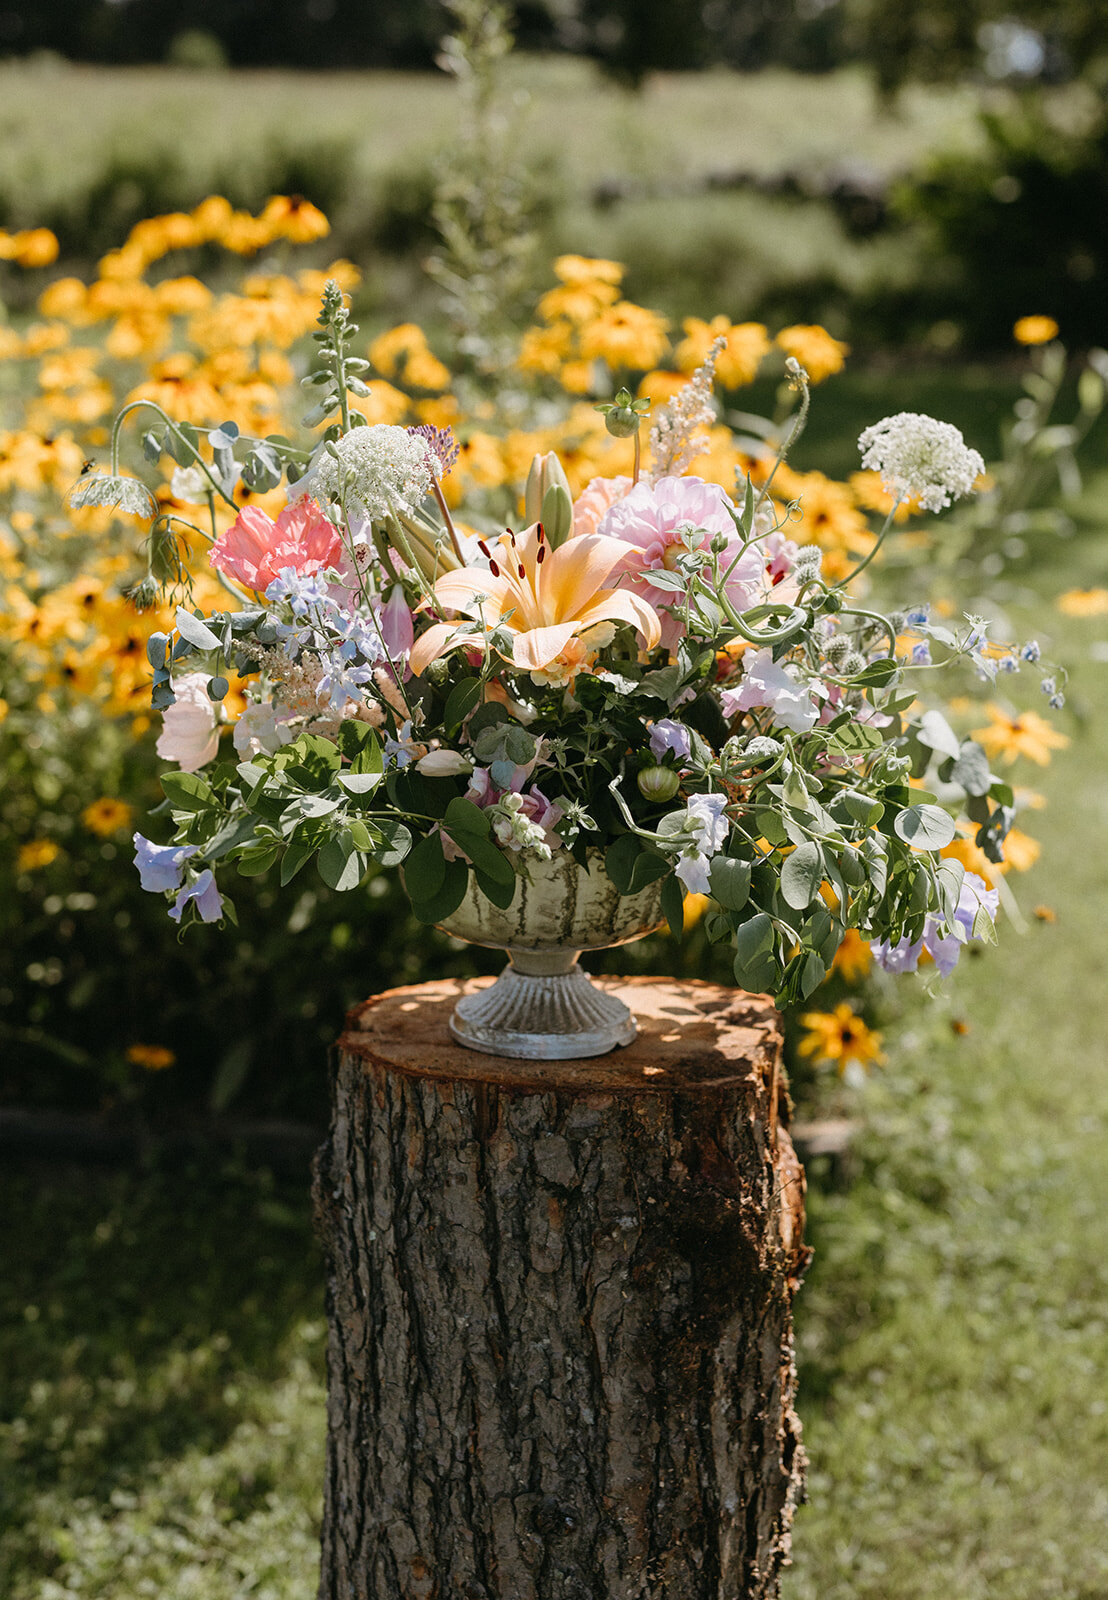 Florals outside at a New England wedding